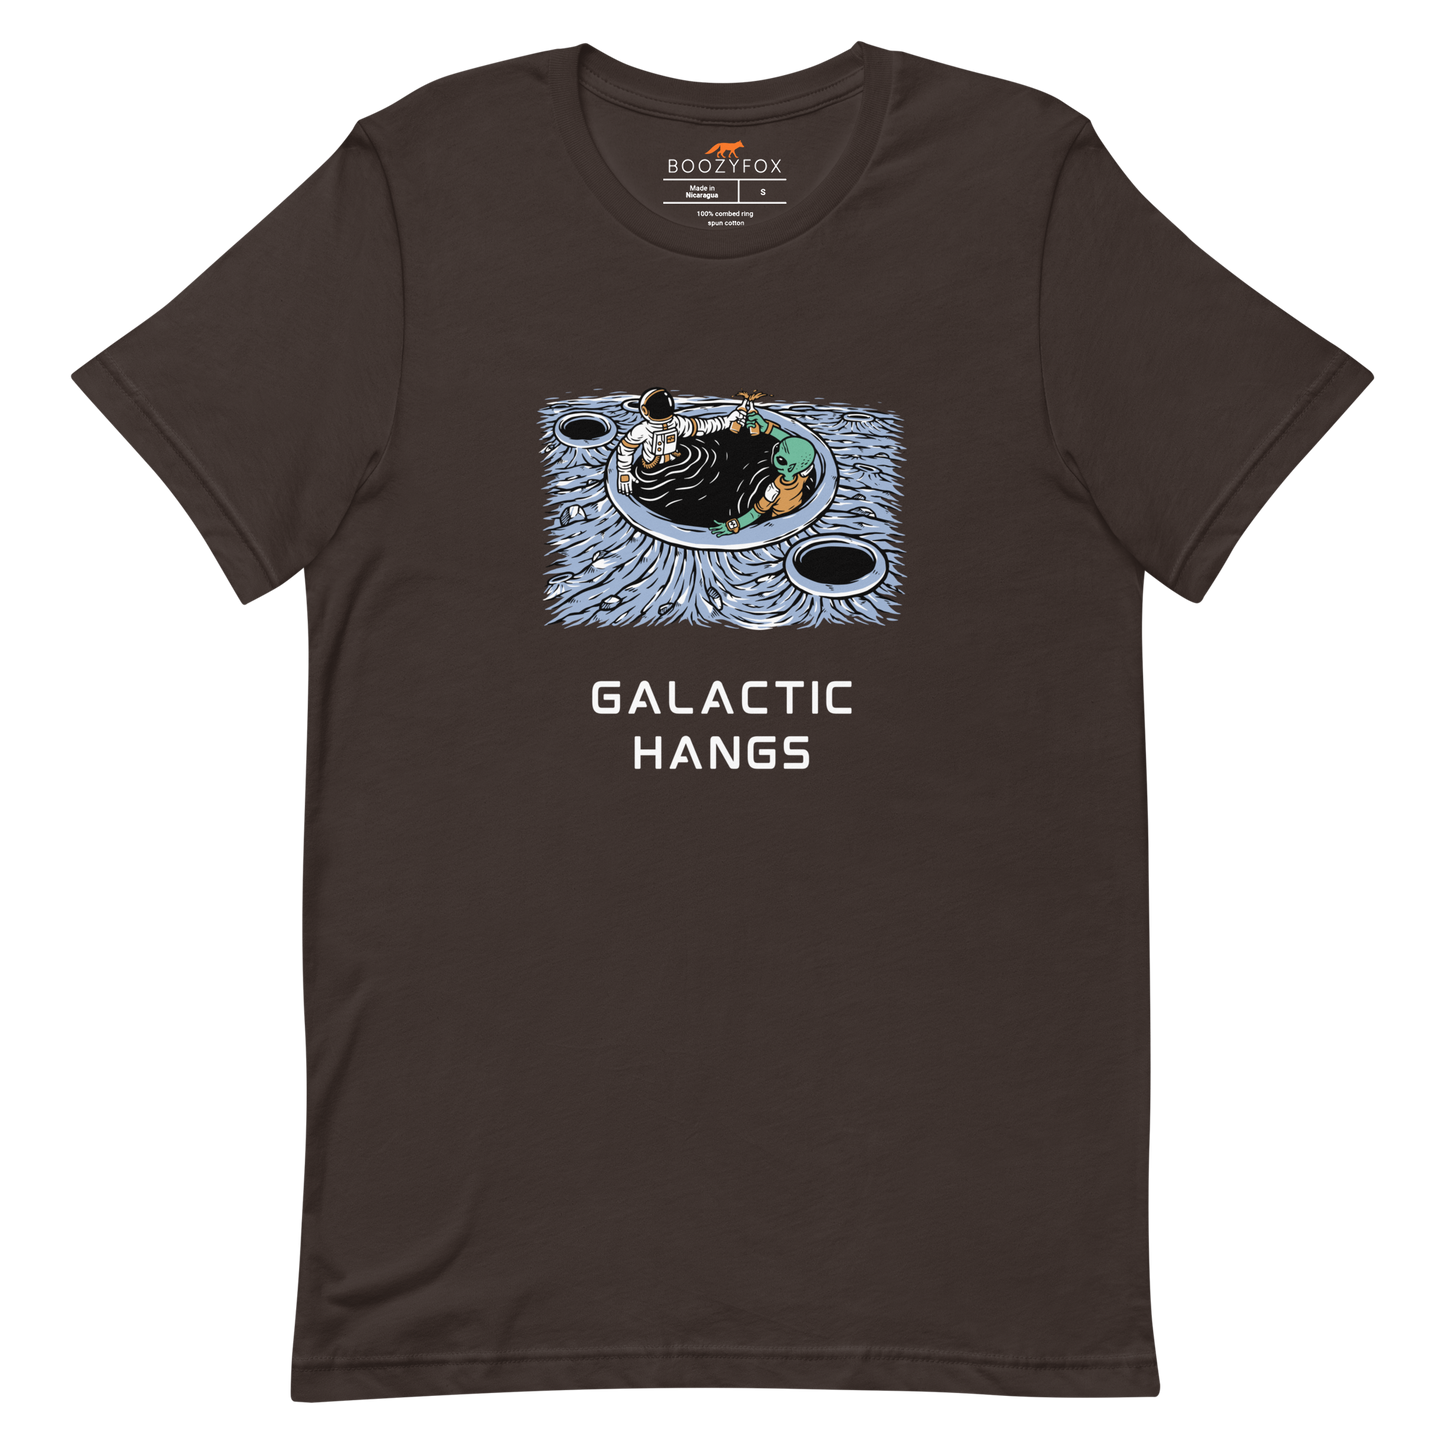 Brown Premium Galactic Hangs Tee featuring an out-of-this-world graphic of an Astronaut and Alien Chilling Together - Funny Graphic Space Tees - Boozy Fox